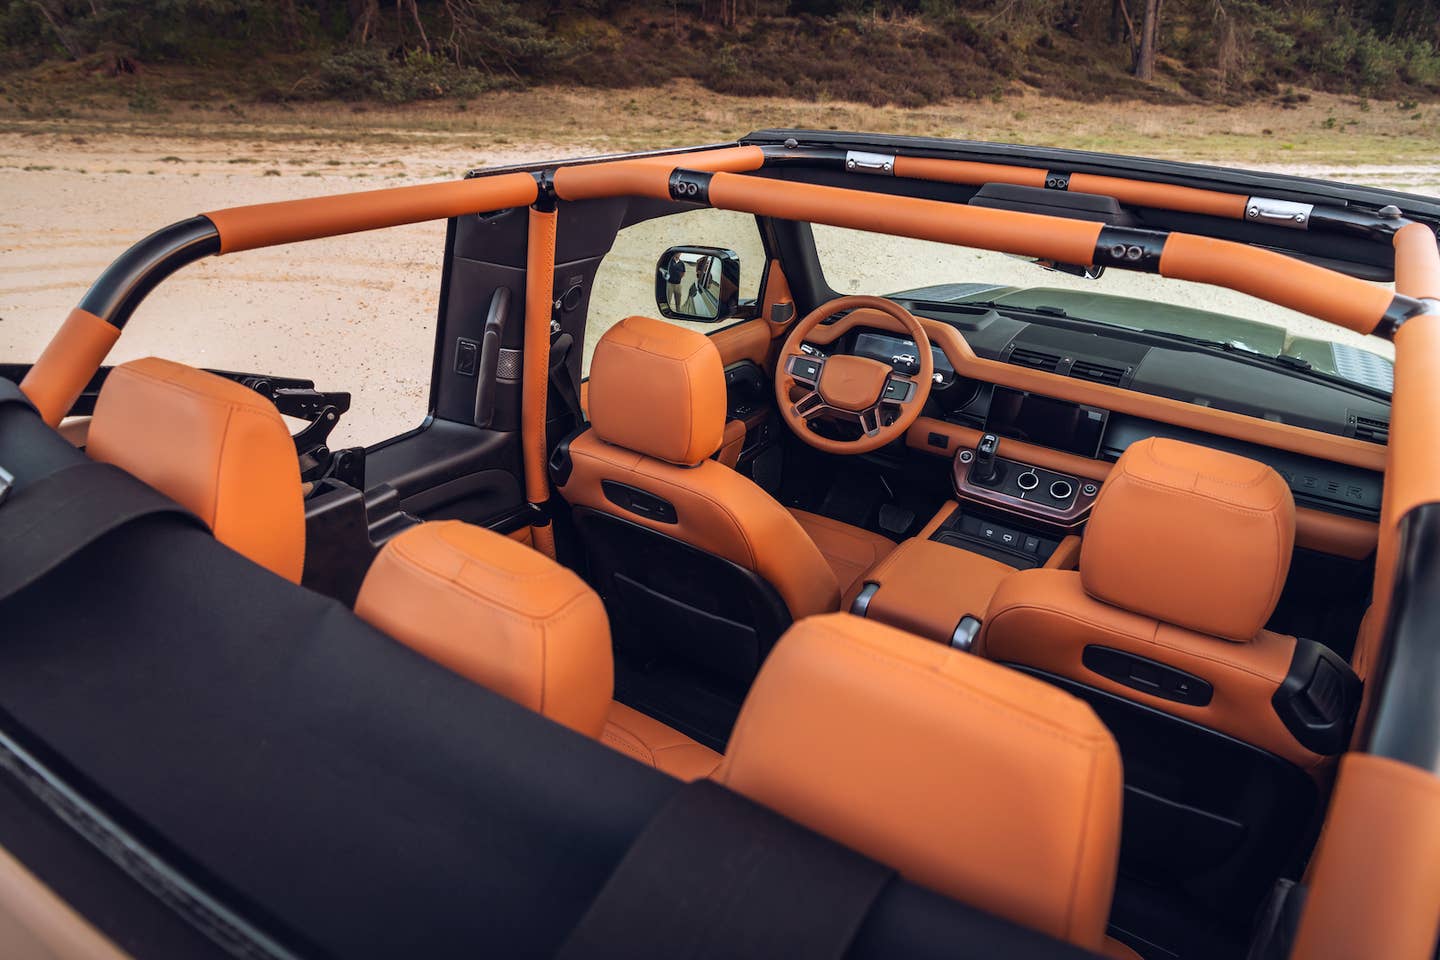 Heritage Customs Valiance Convertible, based on Land Rover Defender 90